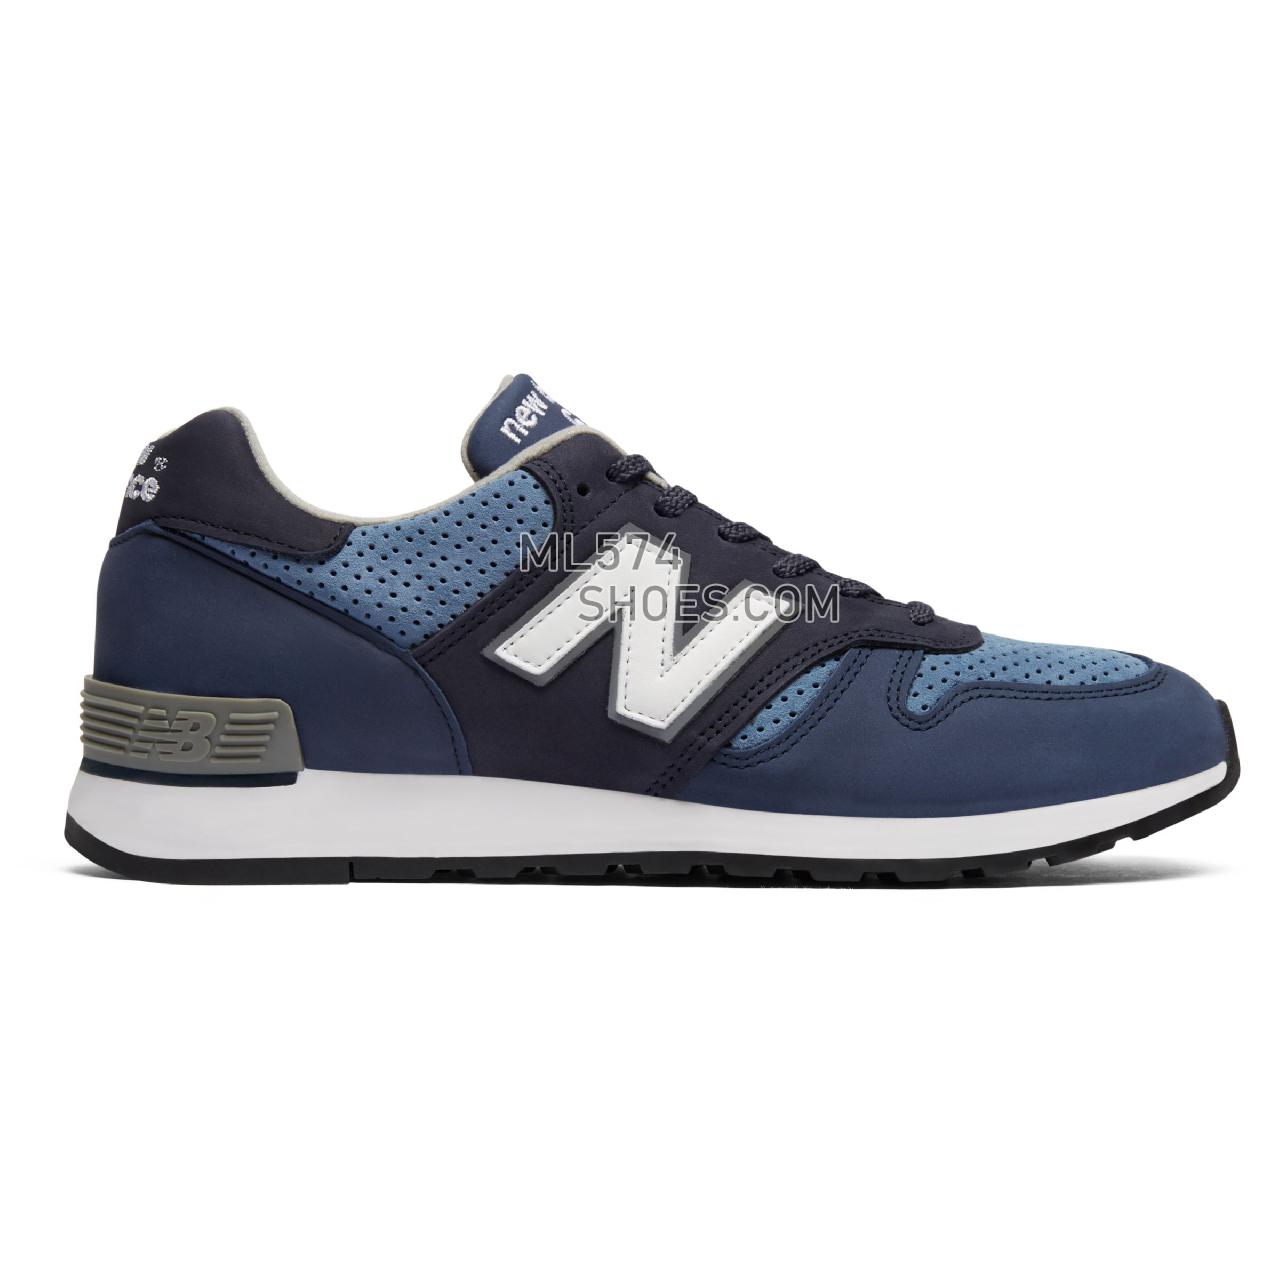 New Balance Made in UK 670 - Men's Made in UK 670 Classic - Navy with Blue and Grey - M670NVT